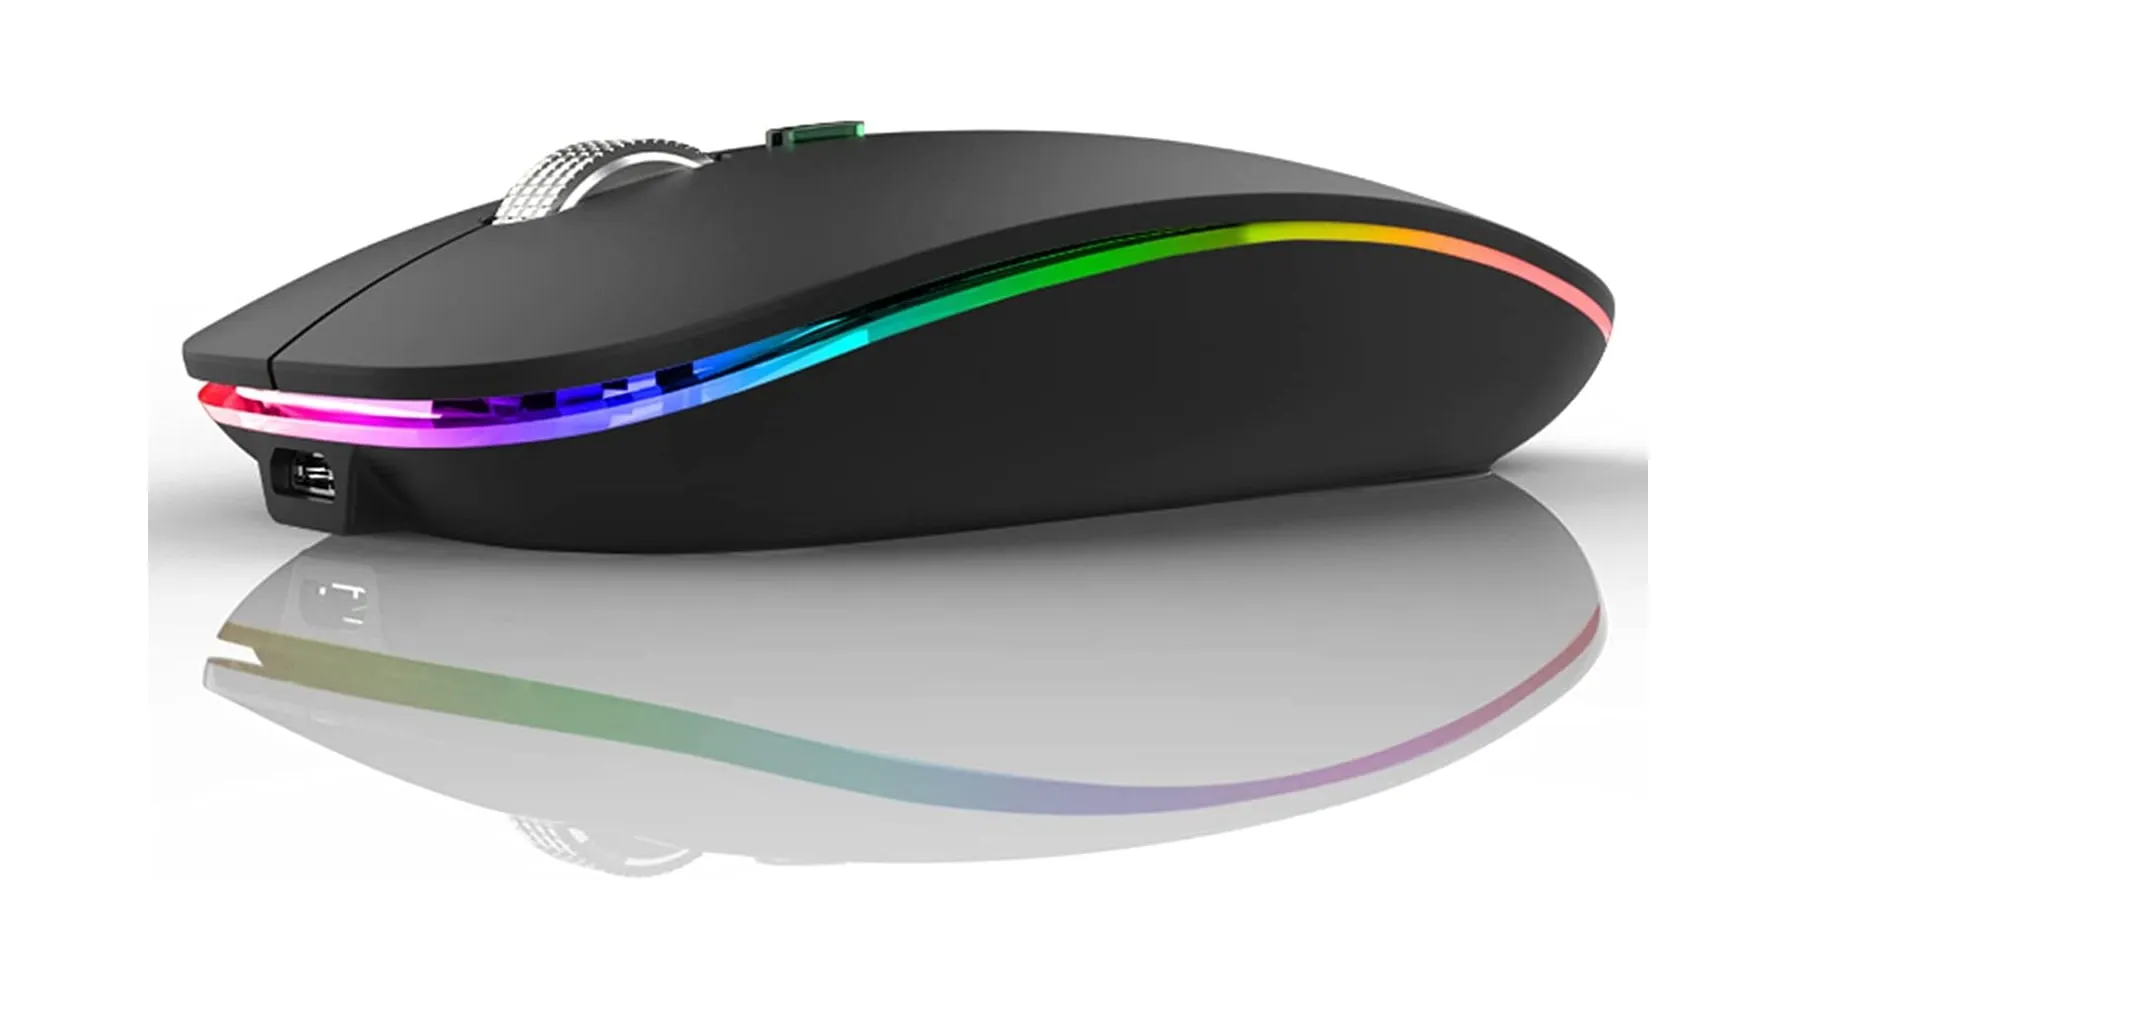 Uiosmuph G12 Slim LED Wireless Mouse